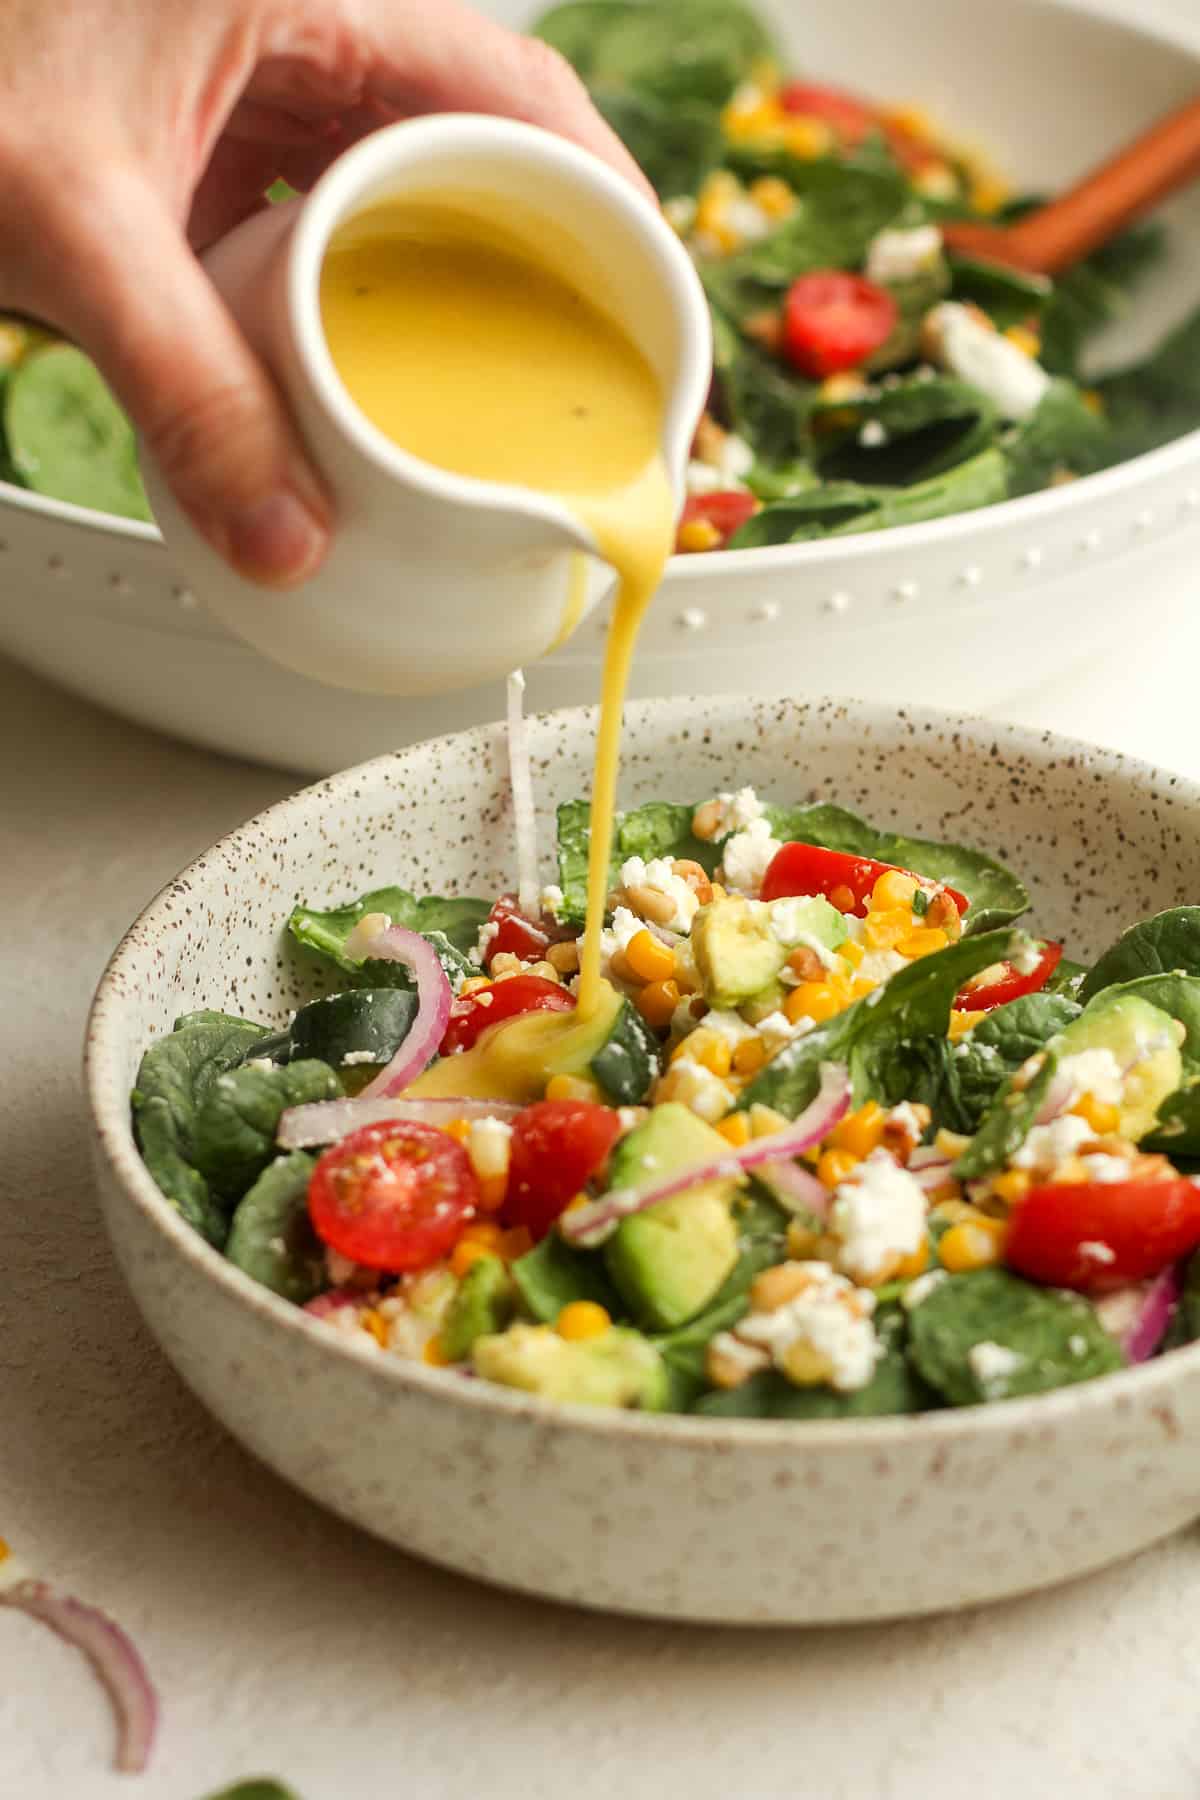 Side view of some creamy salad dressing being poured into a serving of salad.